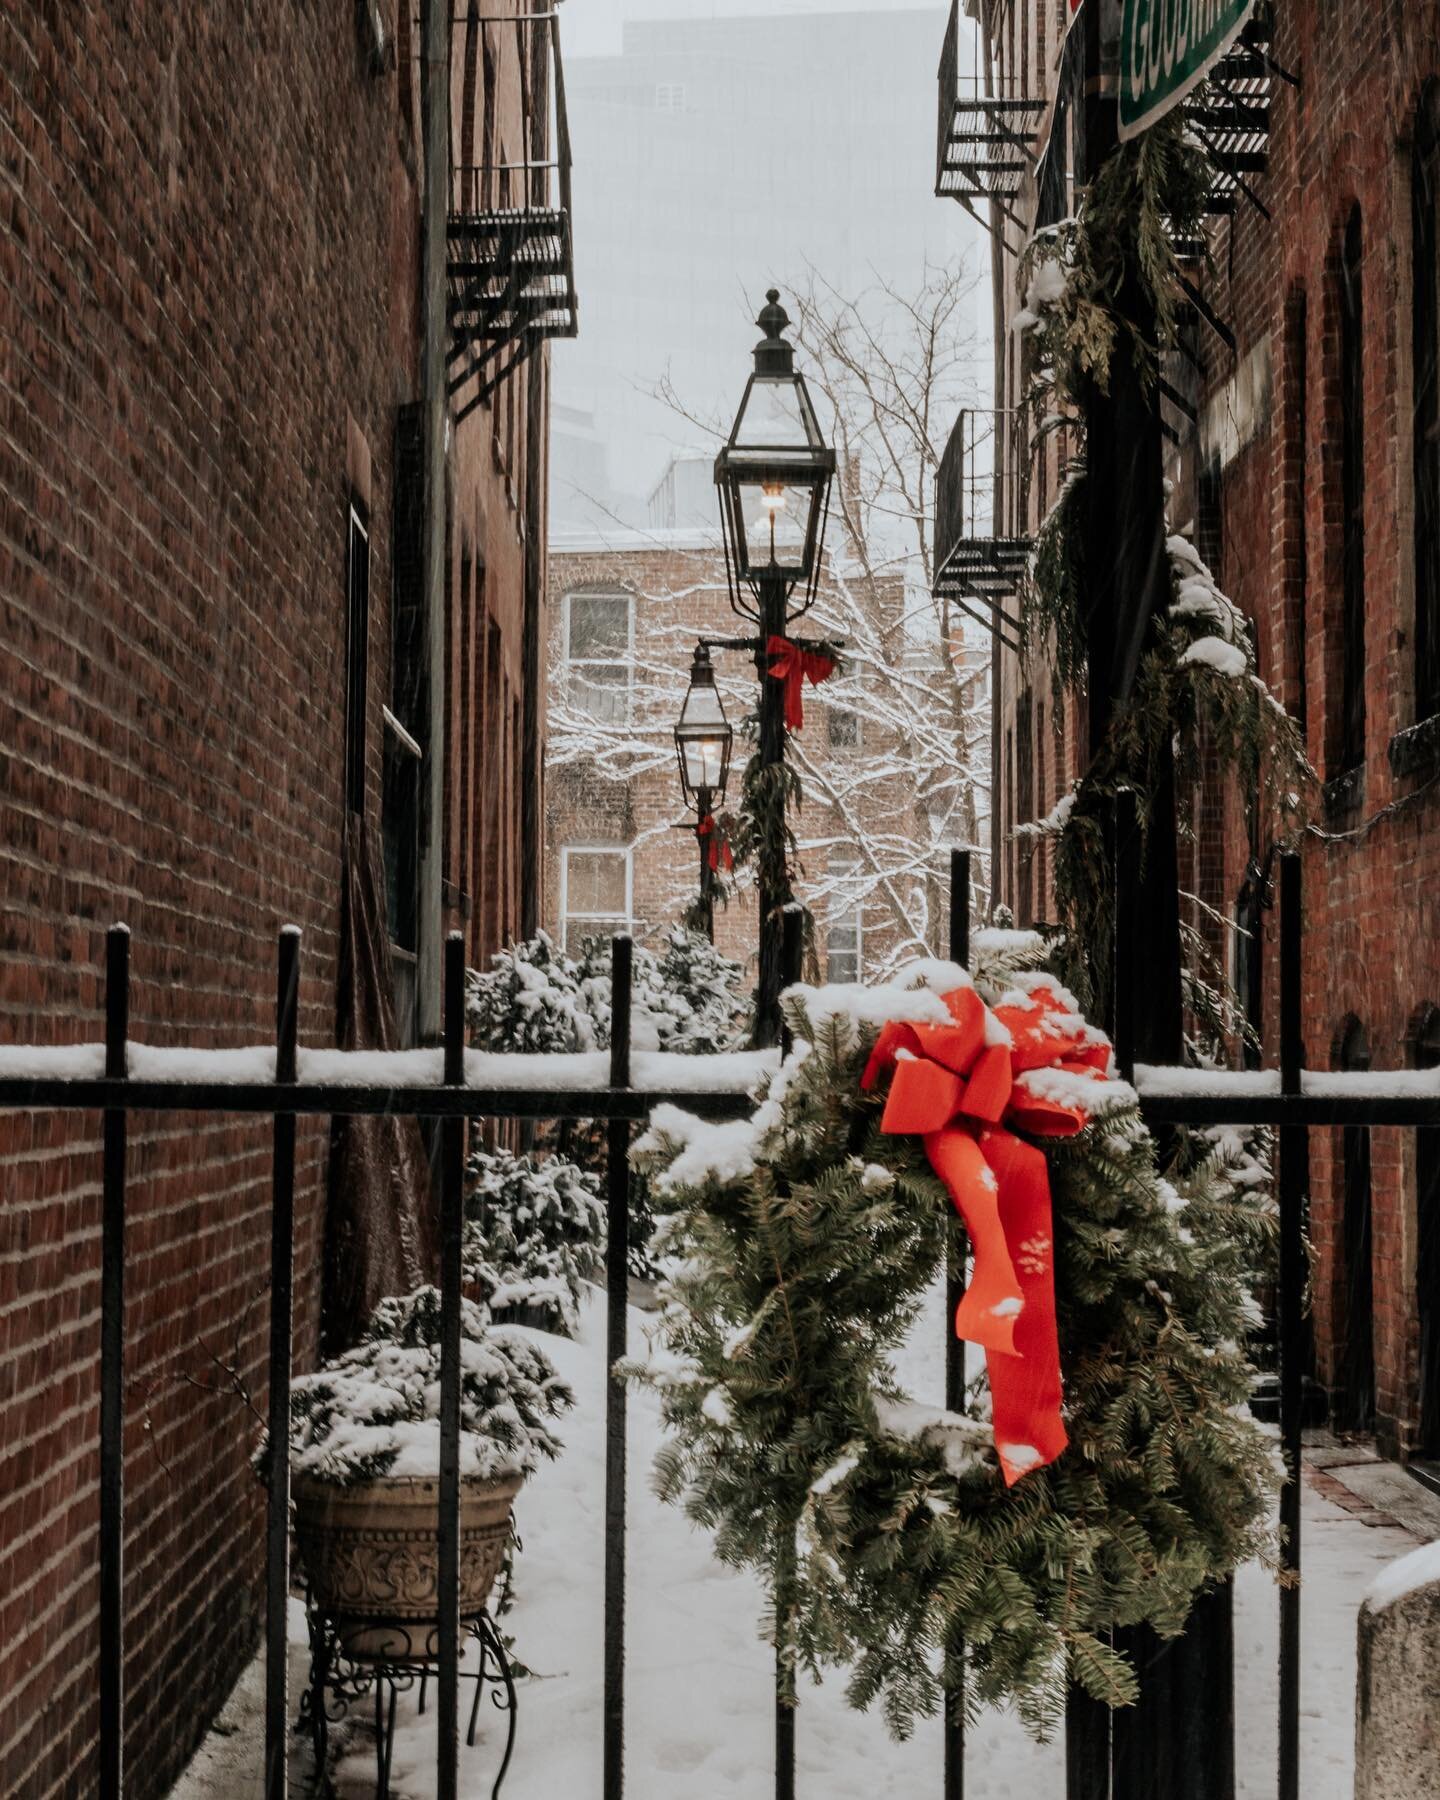 In Beacon Hill, even the alleyways get dressed up 🎁 #bostonbrunchguide